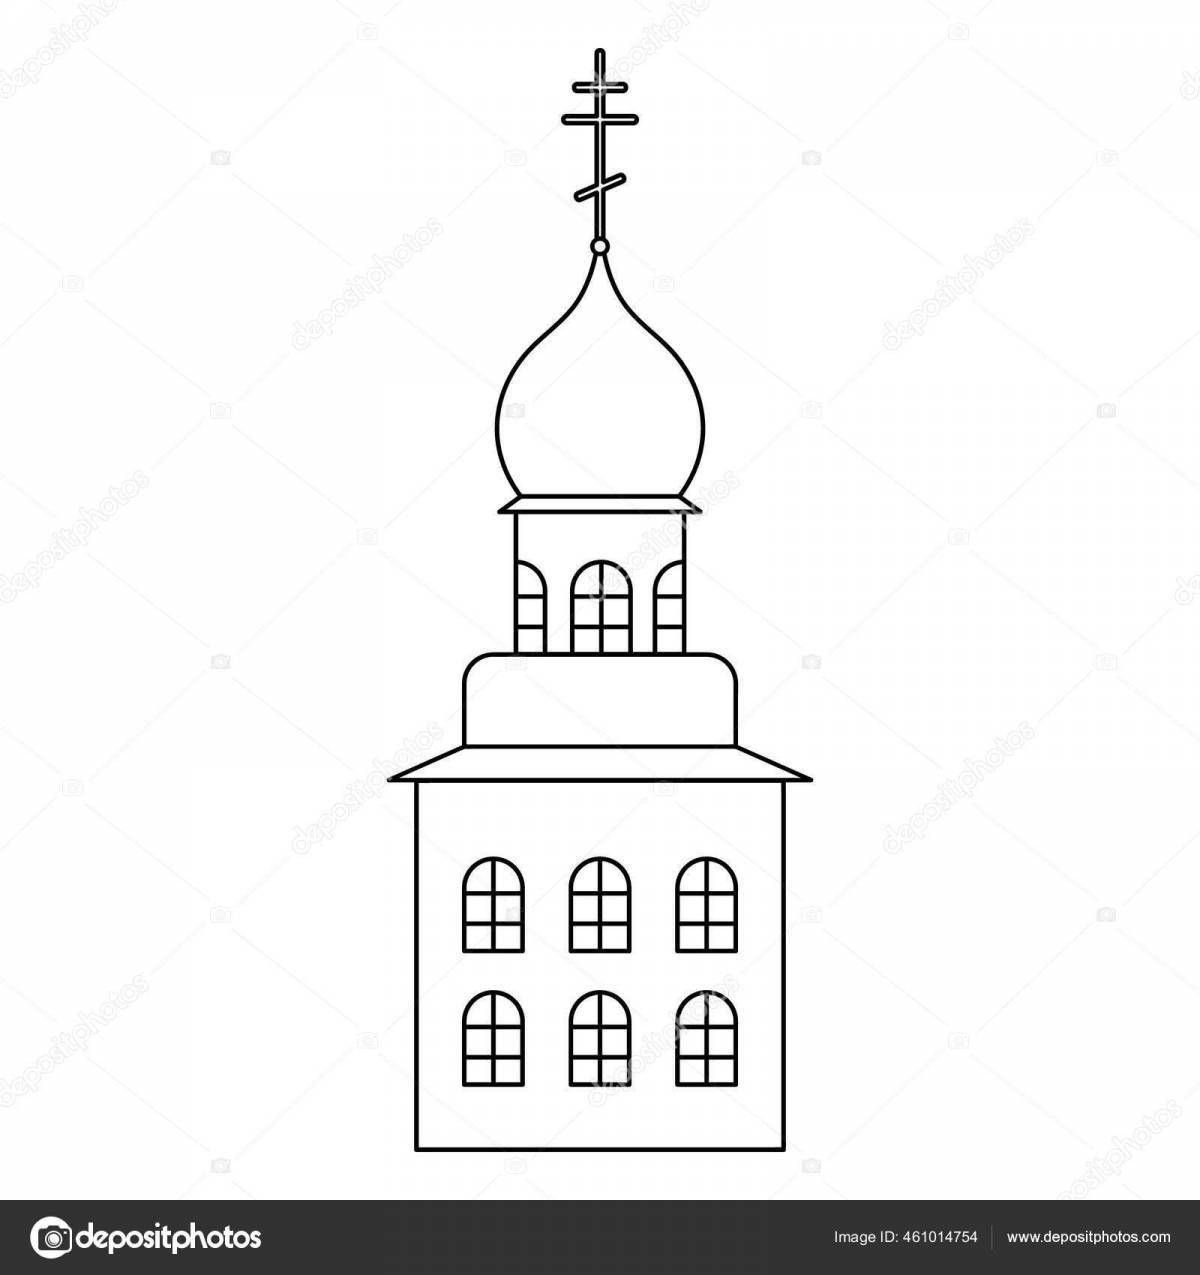 Coloring page luxury church with domes